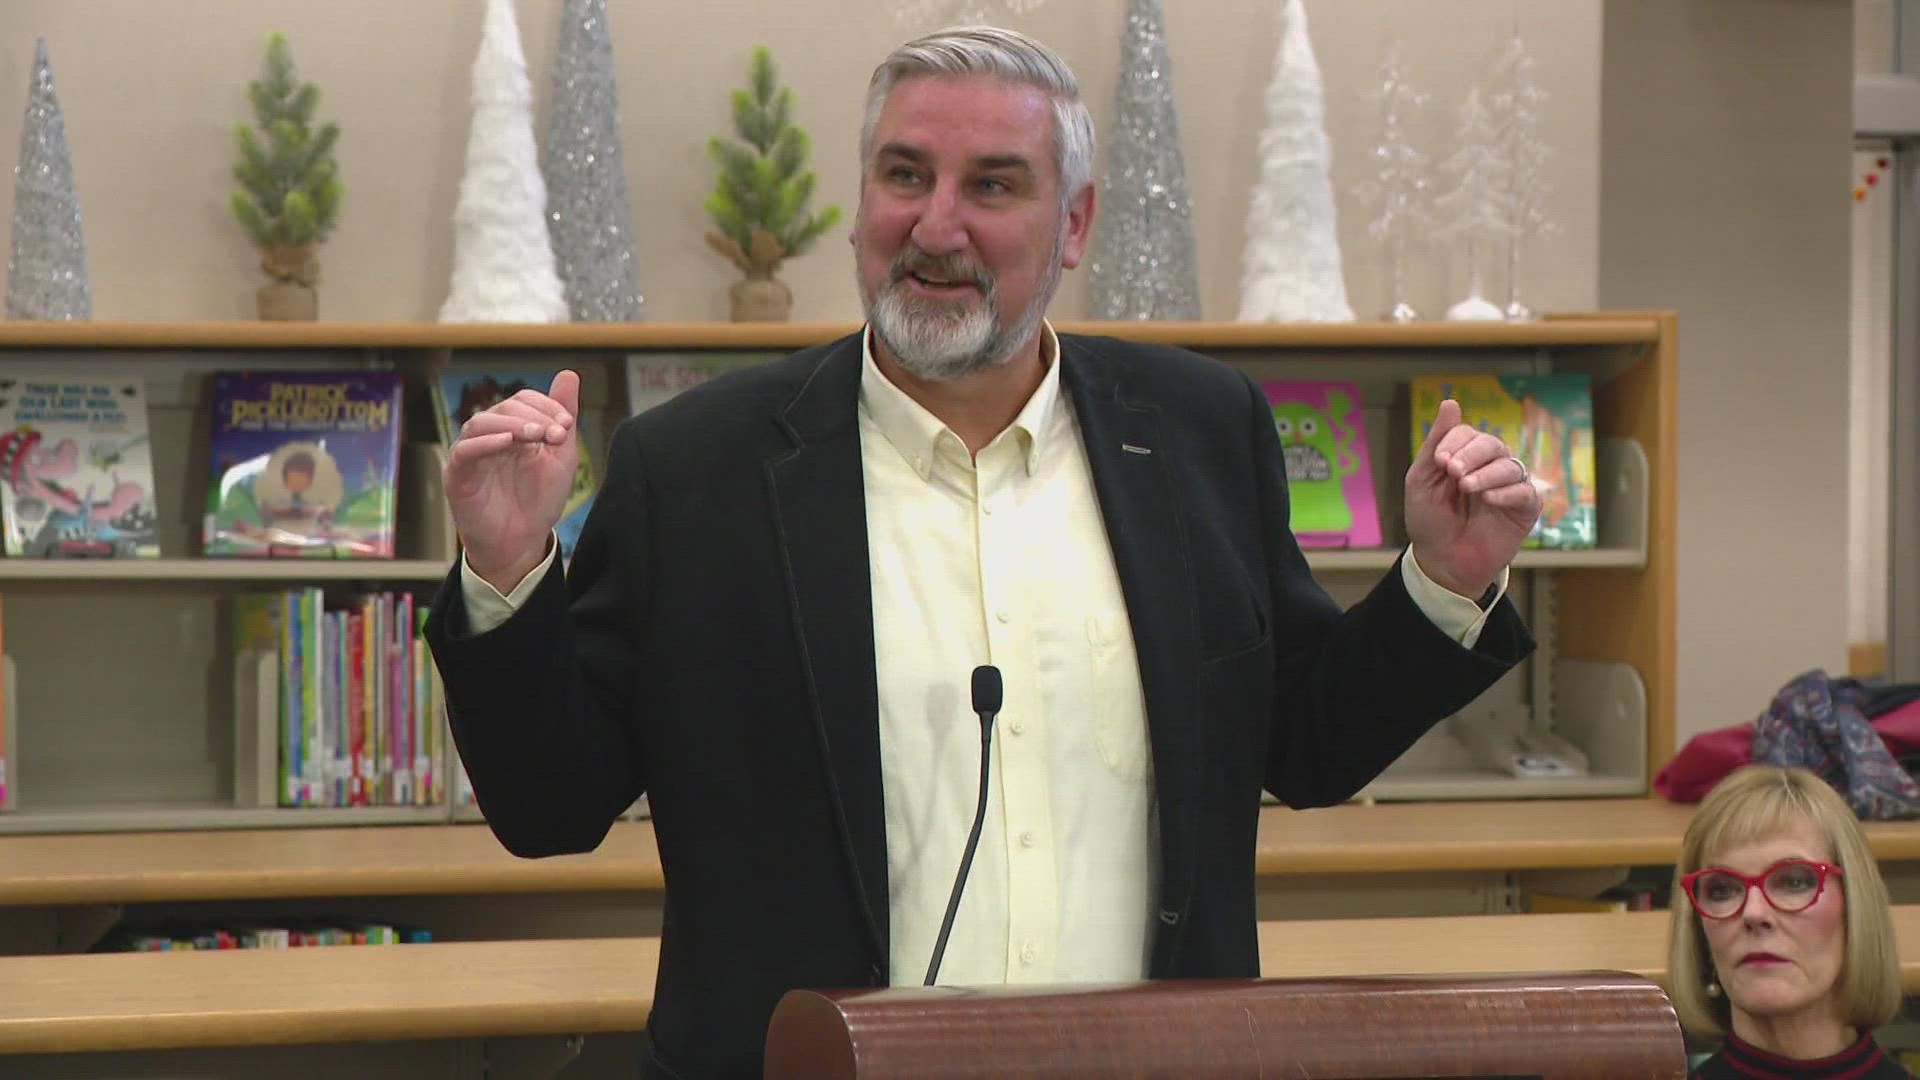 Holcomb wants to give officers more money and prioritize Hoosiers' health, but his main focus is education.